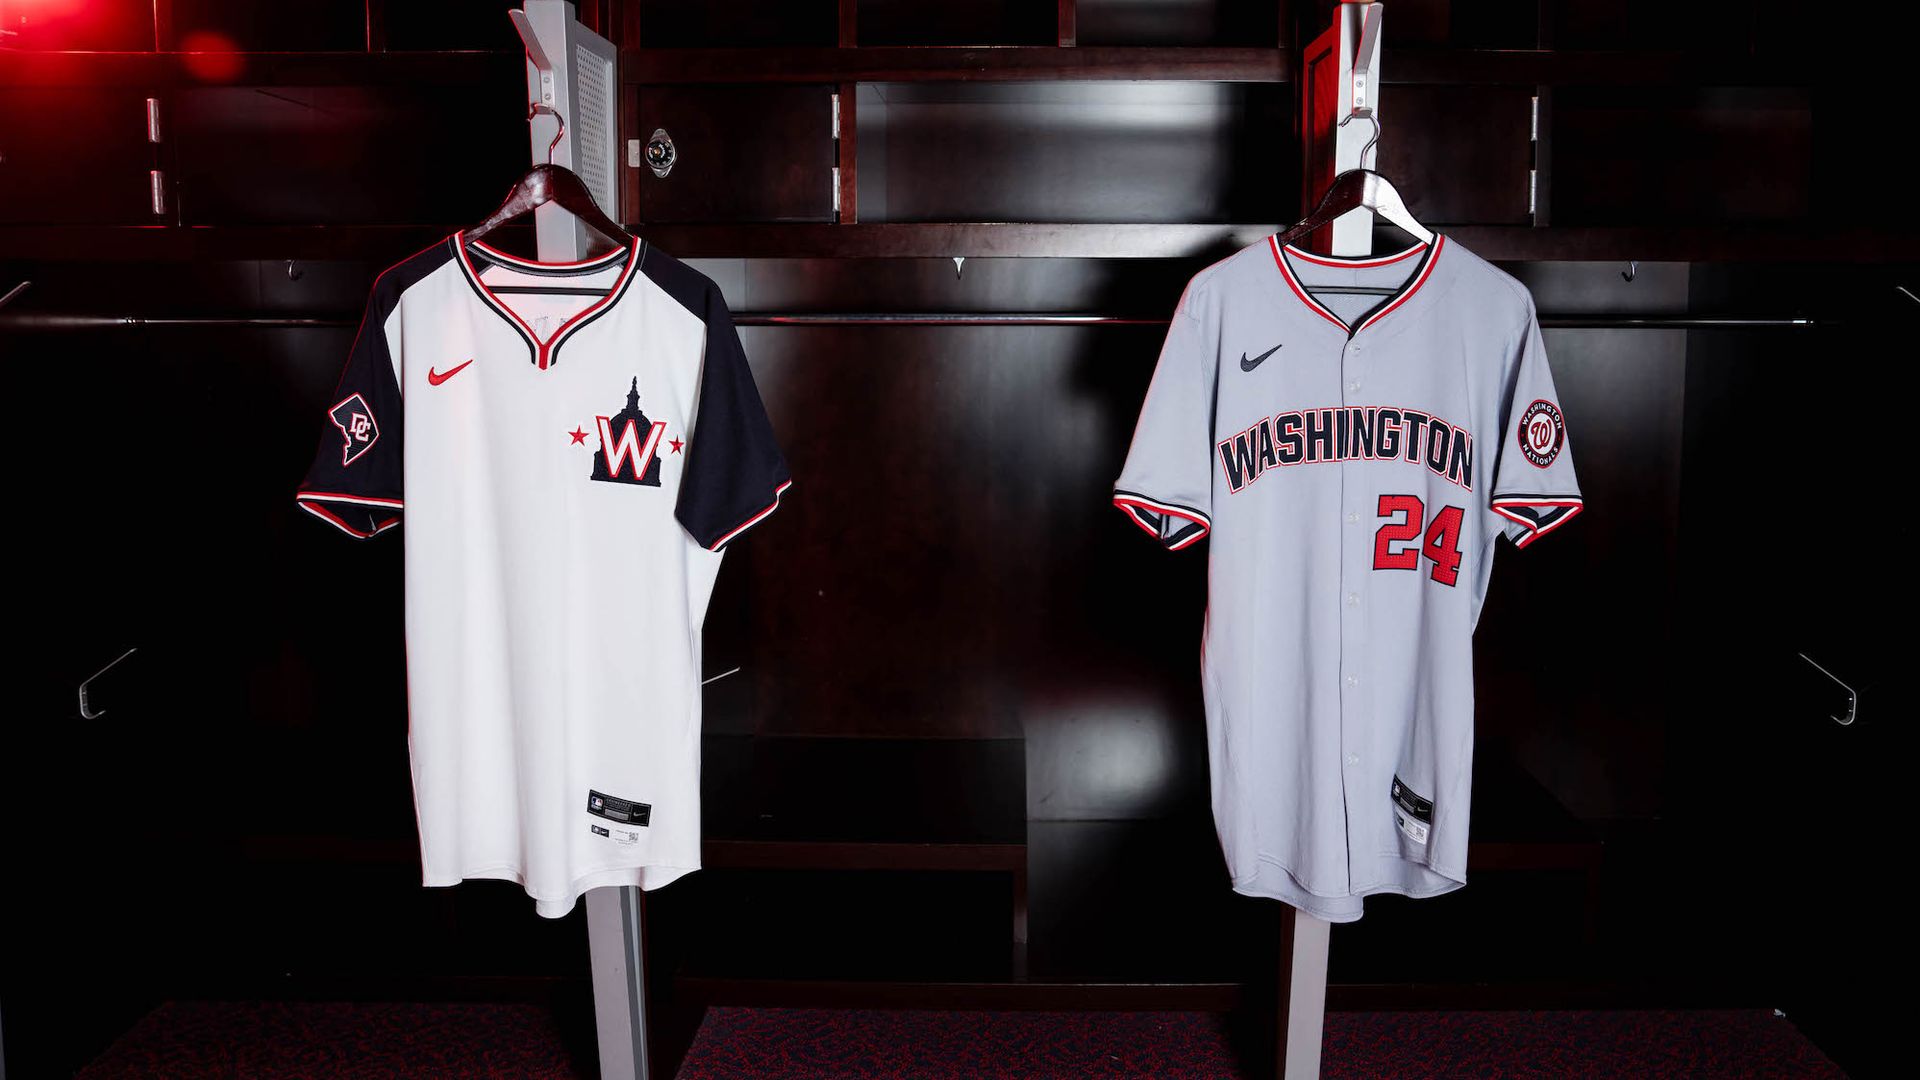 Two new Nationals jerseys, one white the other grey